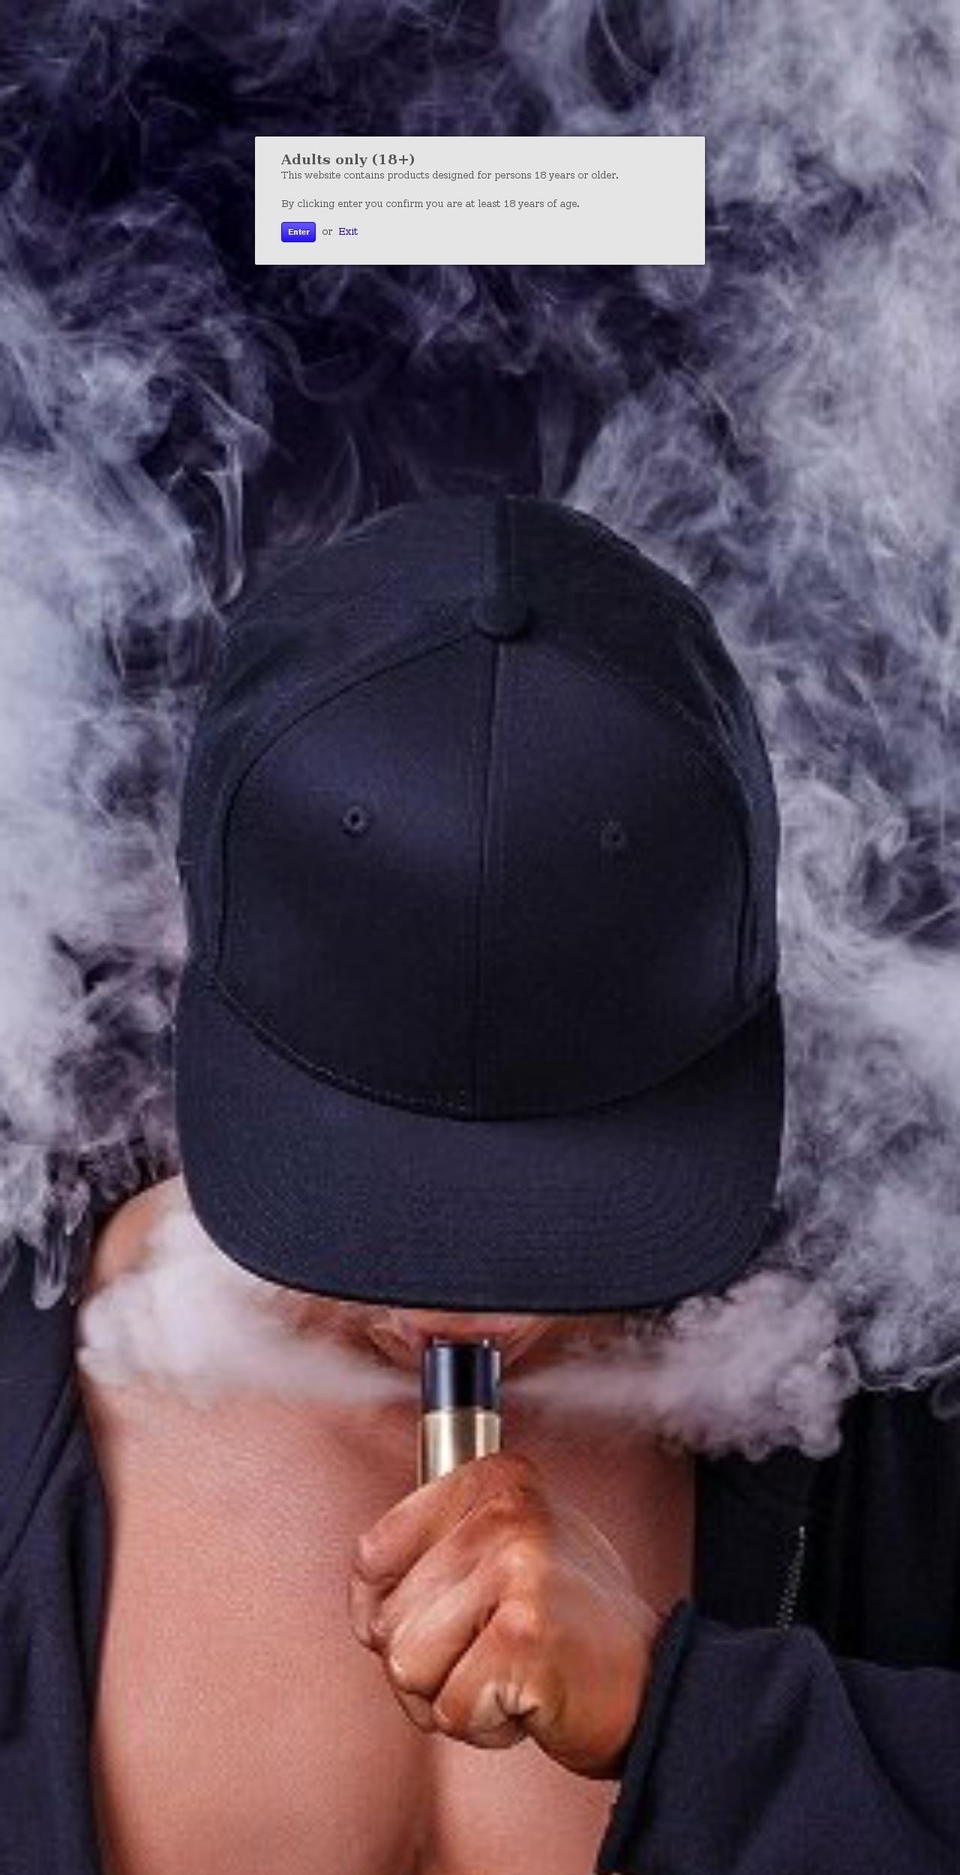 thevape.place shopify website screenshot